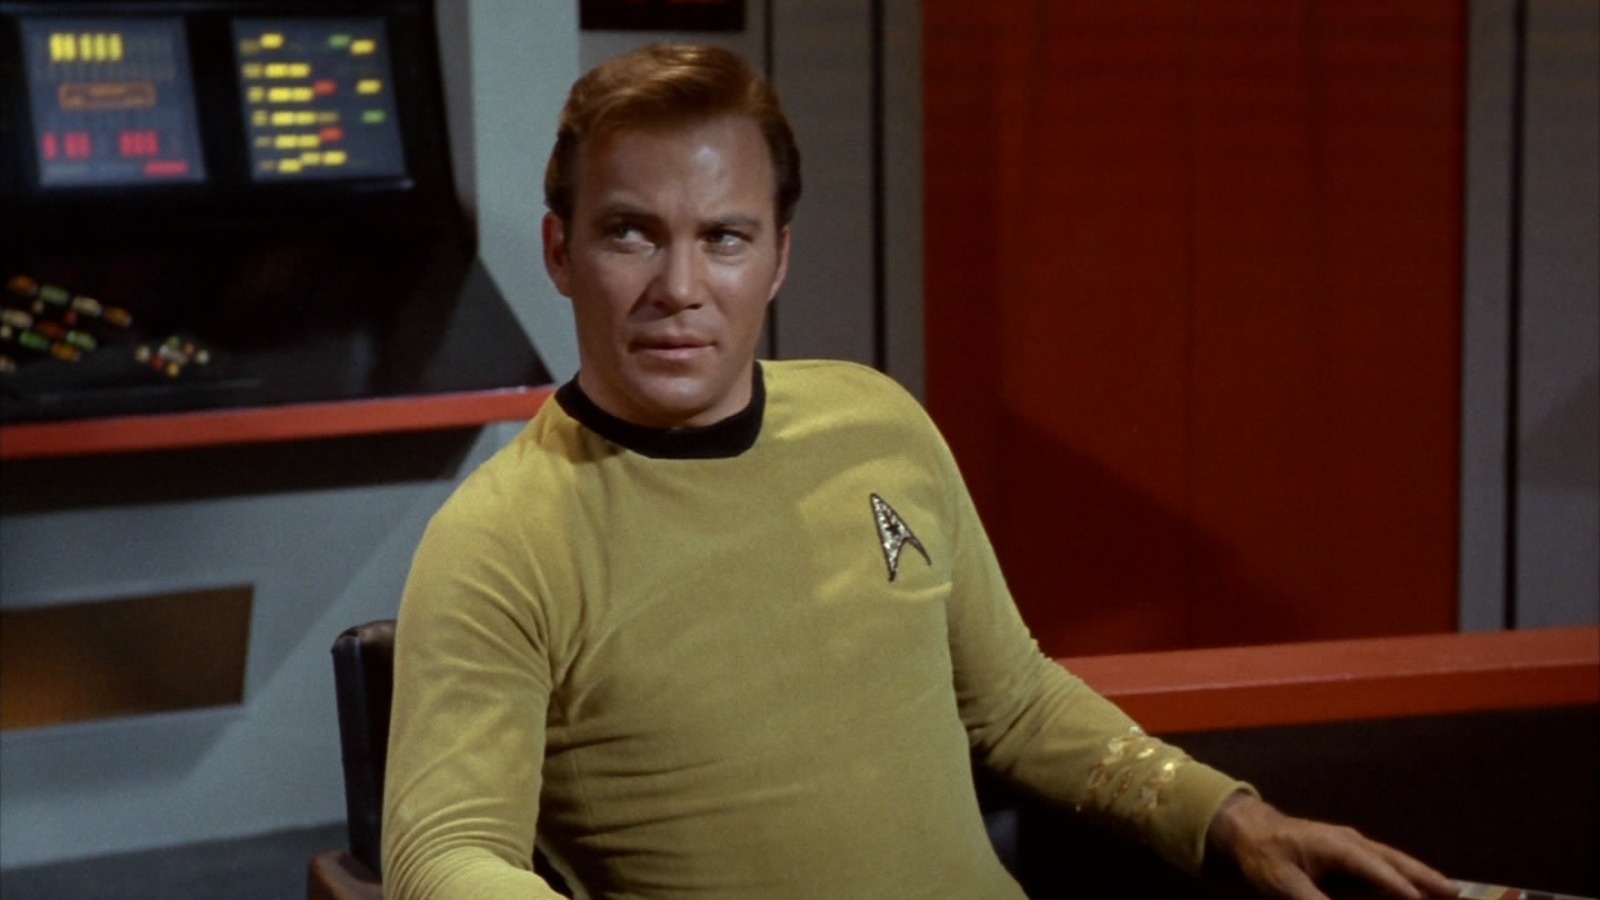 The Only Major Actors Still Alive From Star Trek: The Original Series